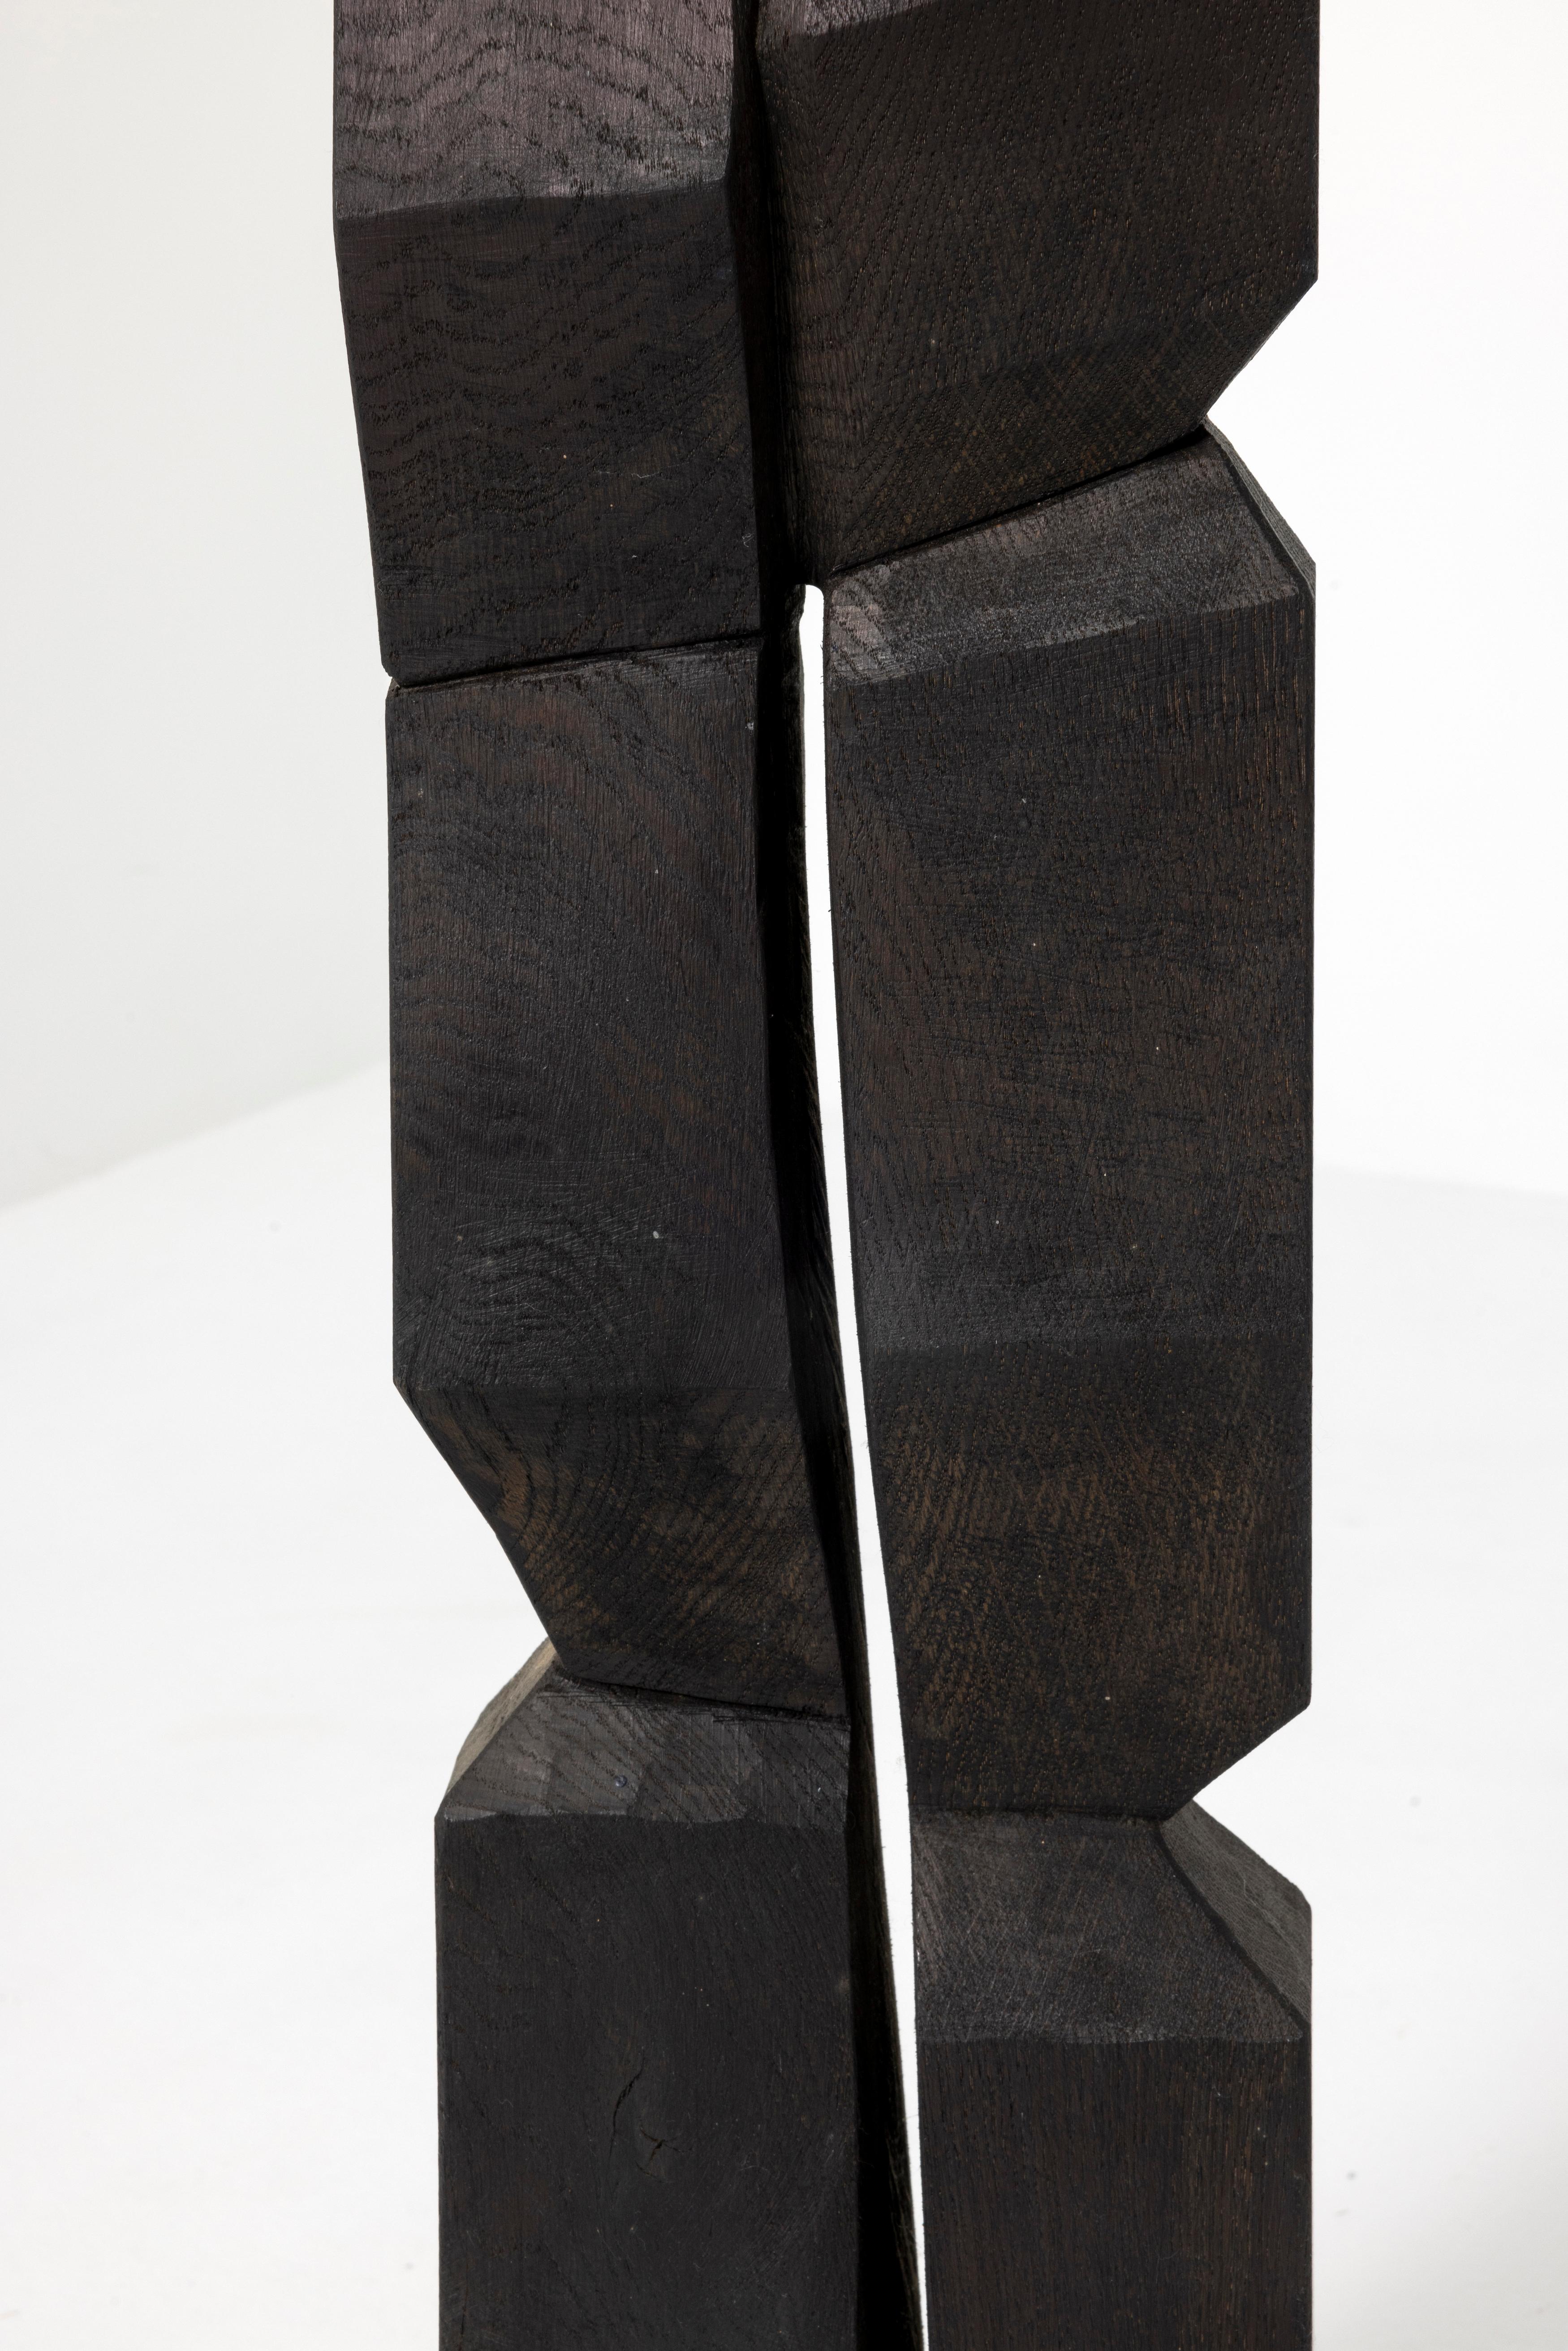 Contemporary Wooden Totem Sculpture by Bertrand Créac'h, France For Sale 4